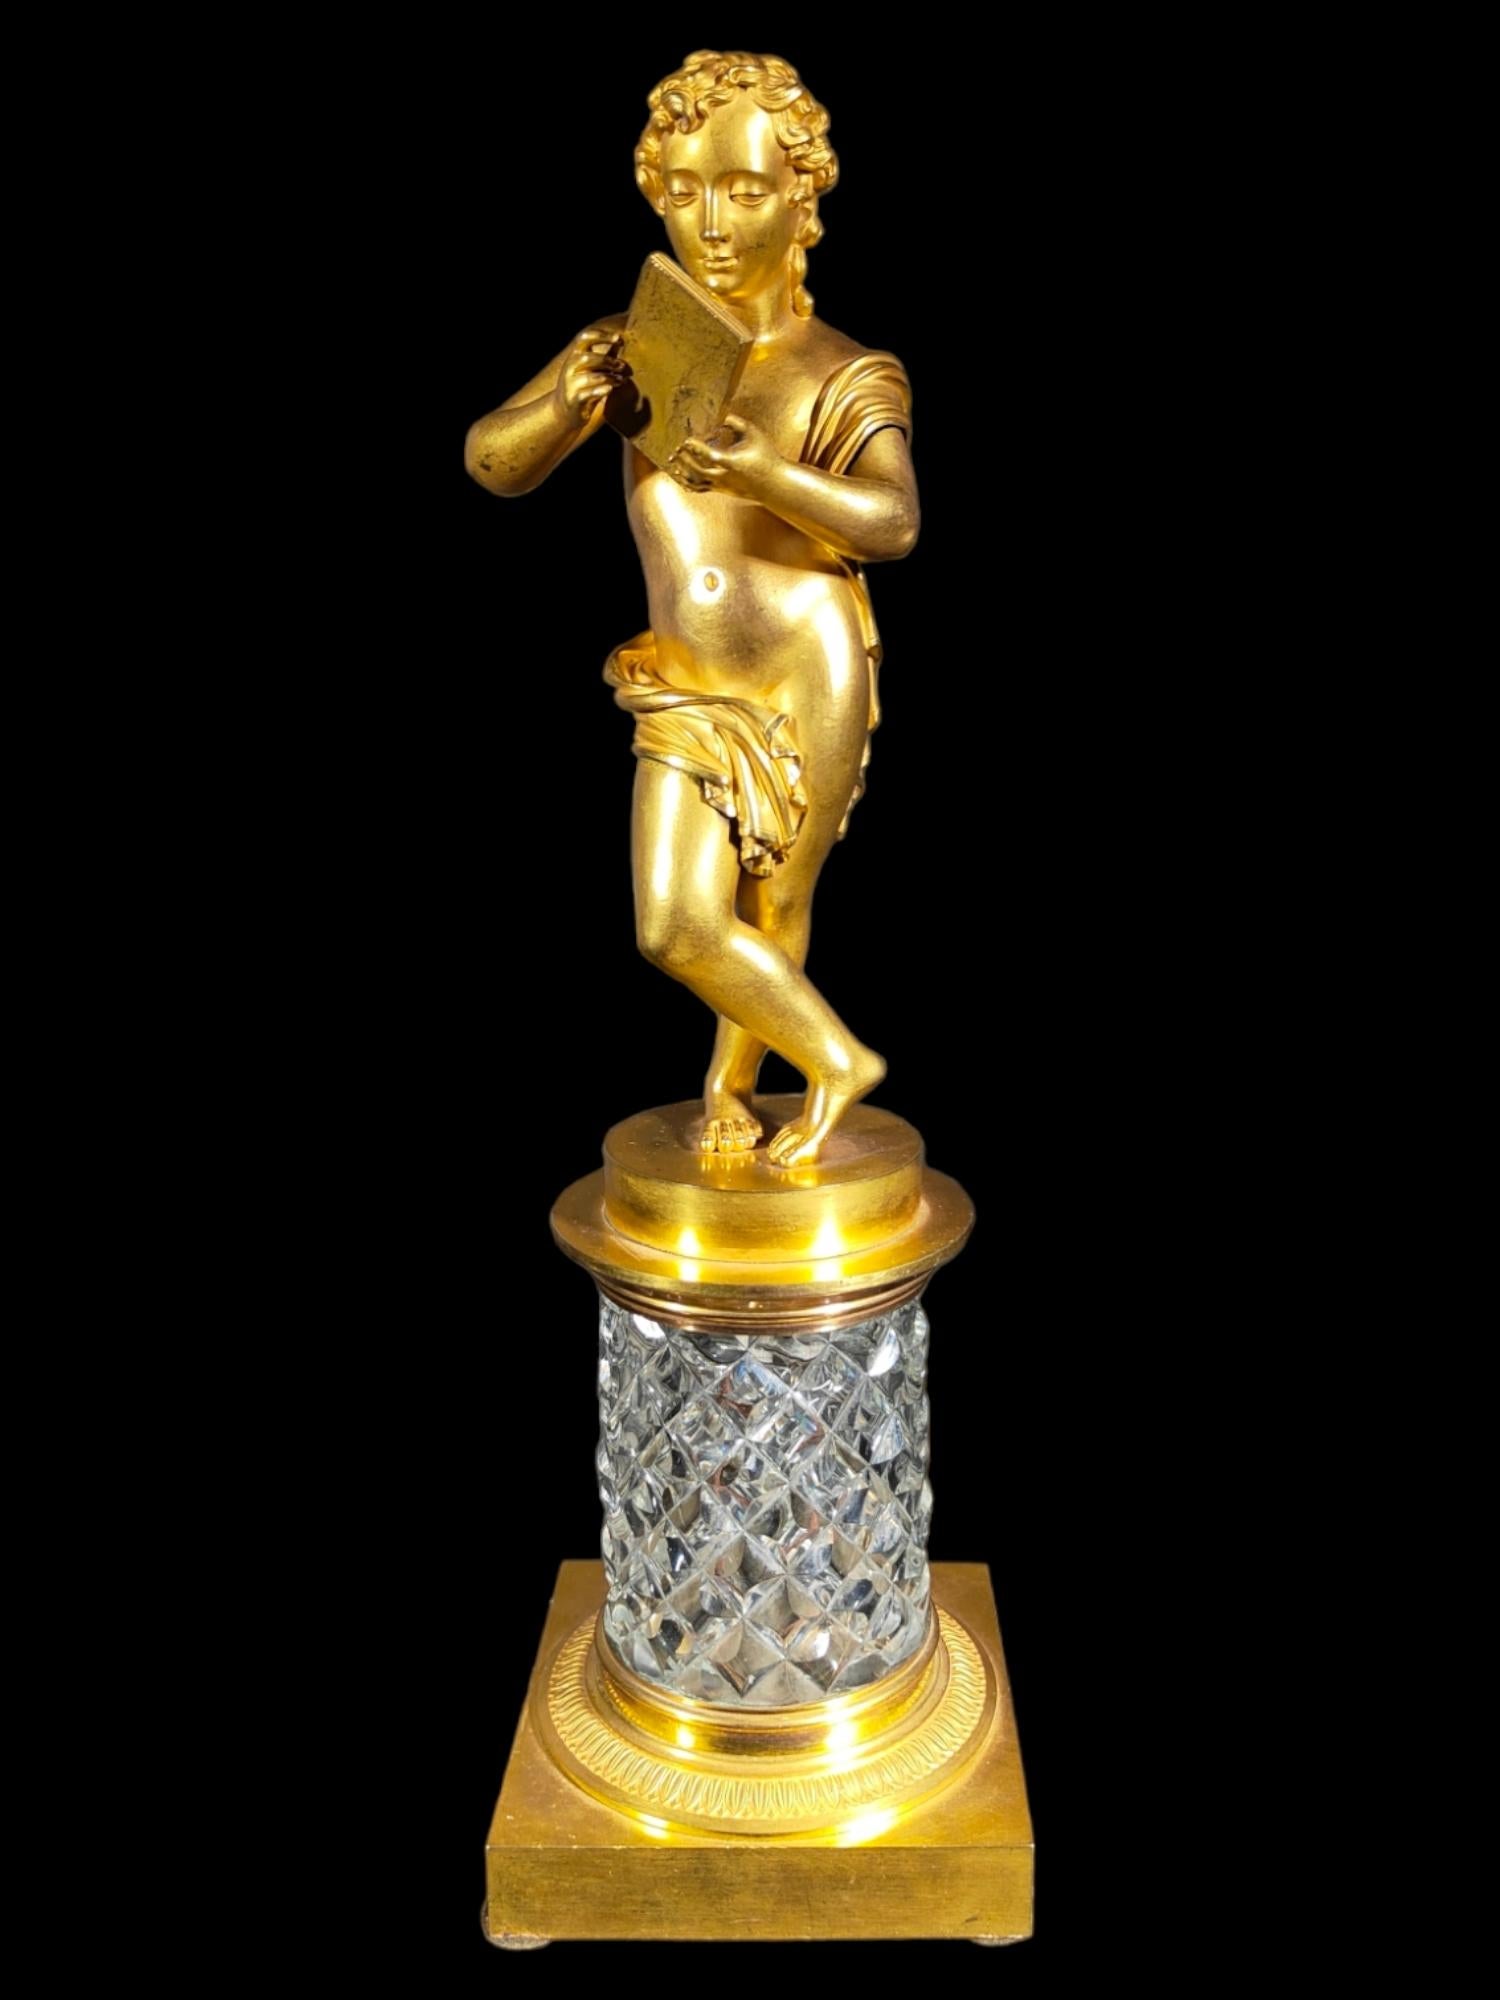 Baccarat crystal and gilt bronze figurine
Figure in french gold bronze with baccarat sculpted glass base. The quality of the bronze is exquisite and the assembly is very decorative. 19th century. Measures: 46 cm height.